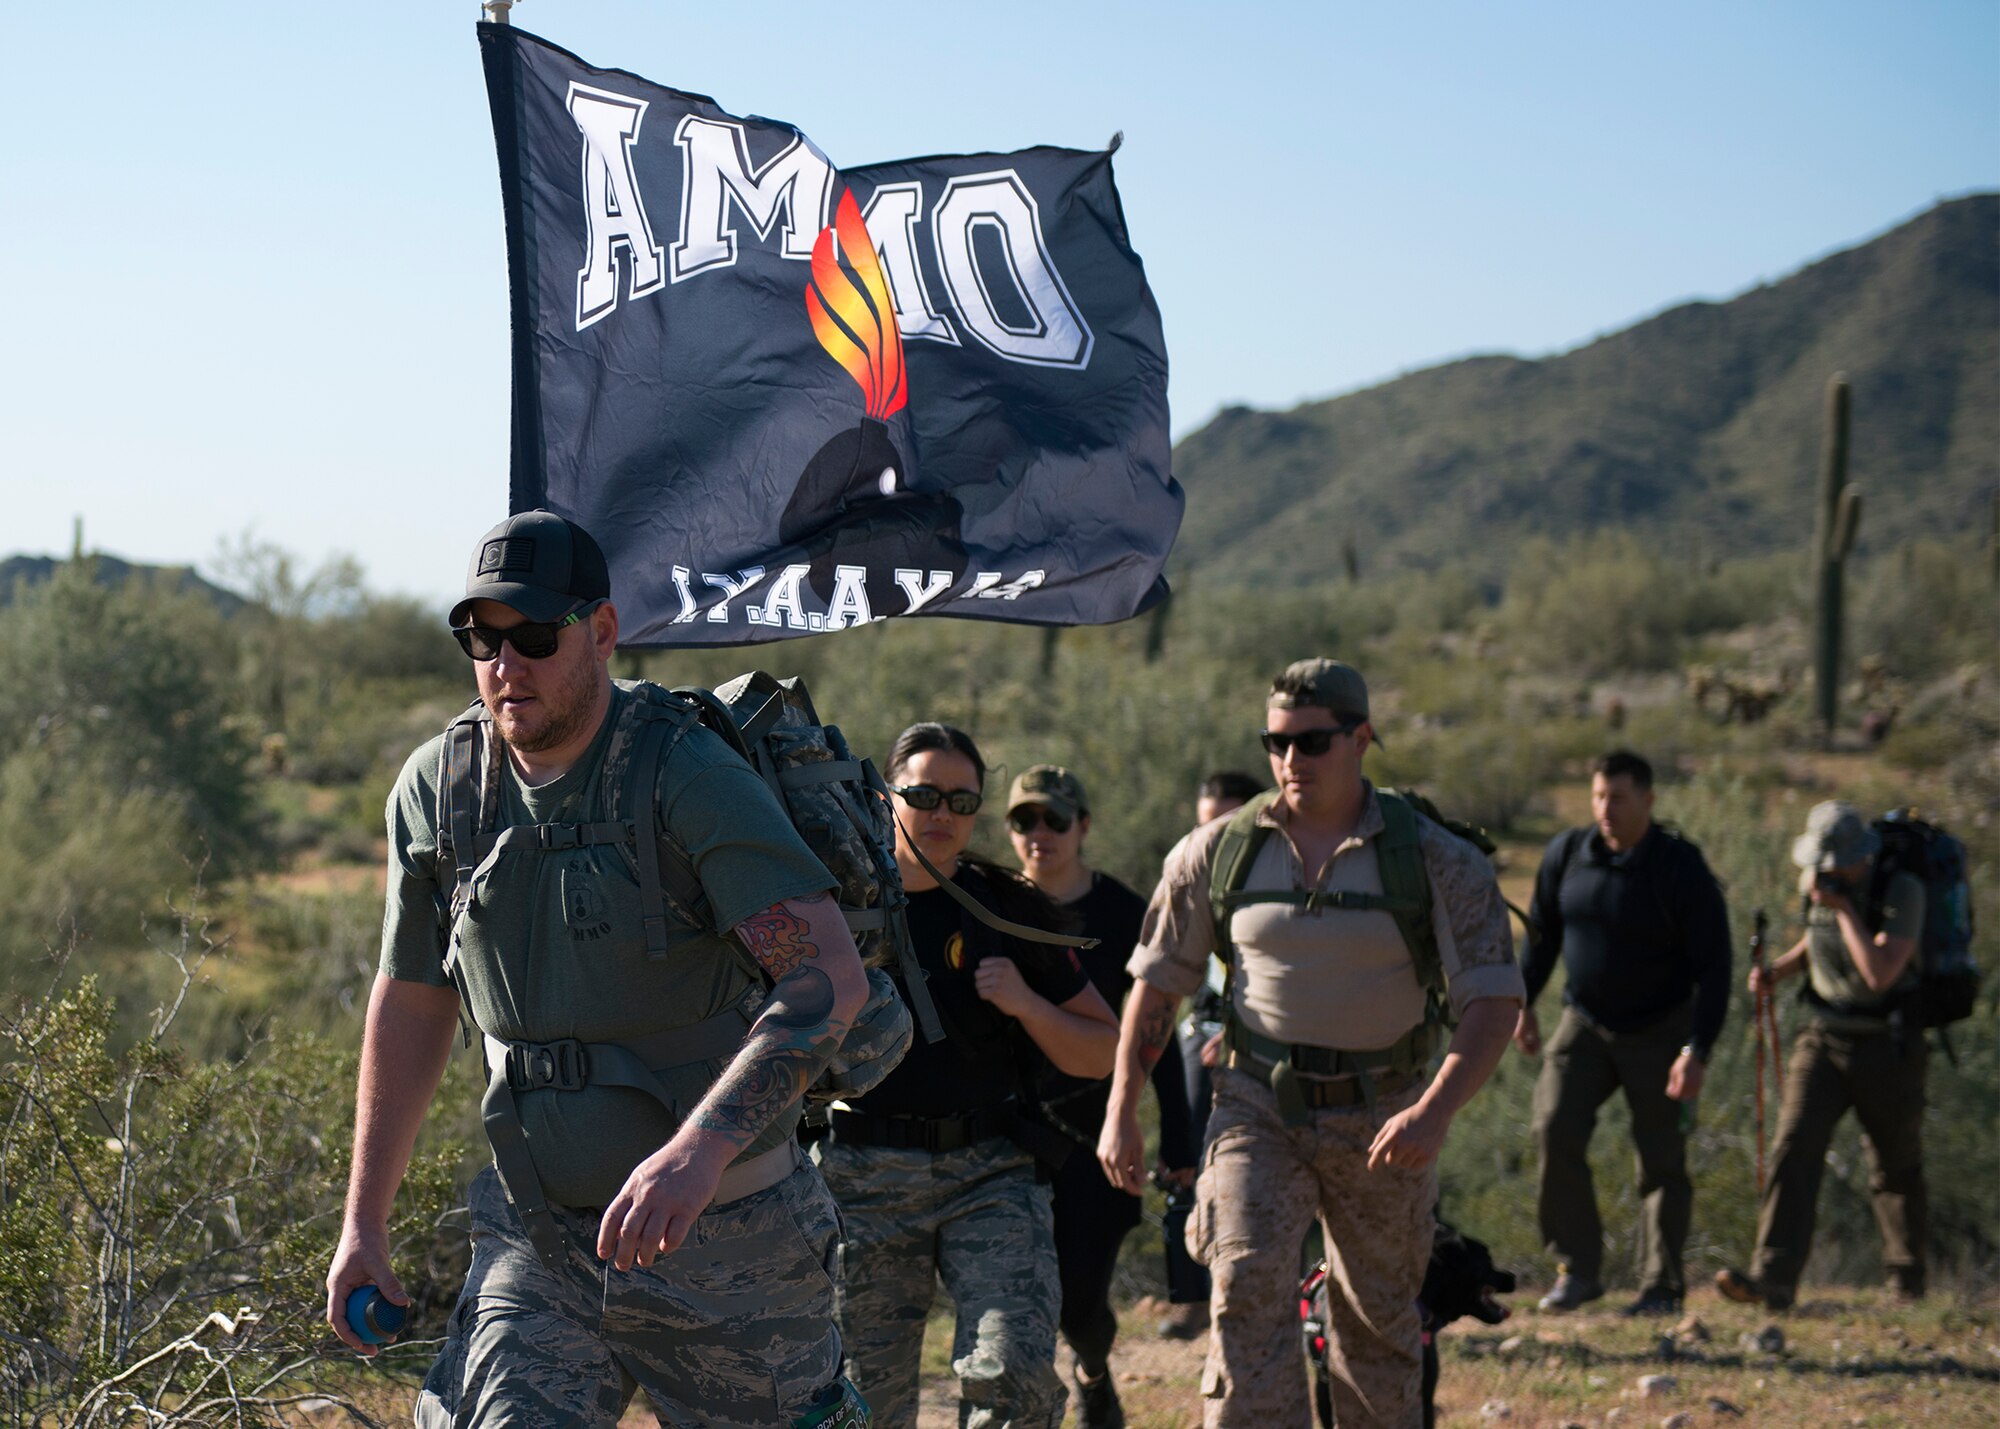 Participants in the March of the Fallen ruck march climb a hill in Buckeye, Ariz., March 16, 2019.